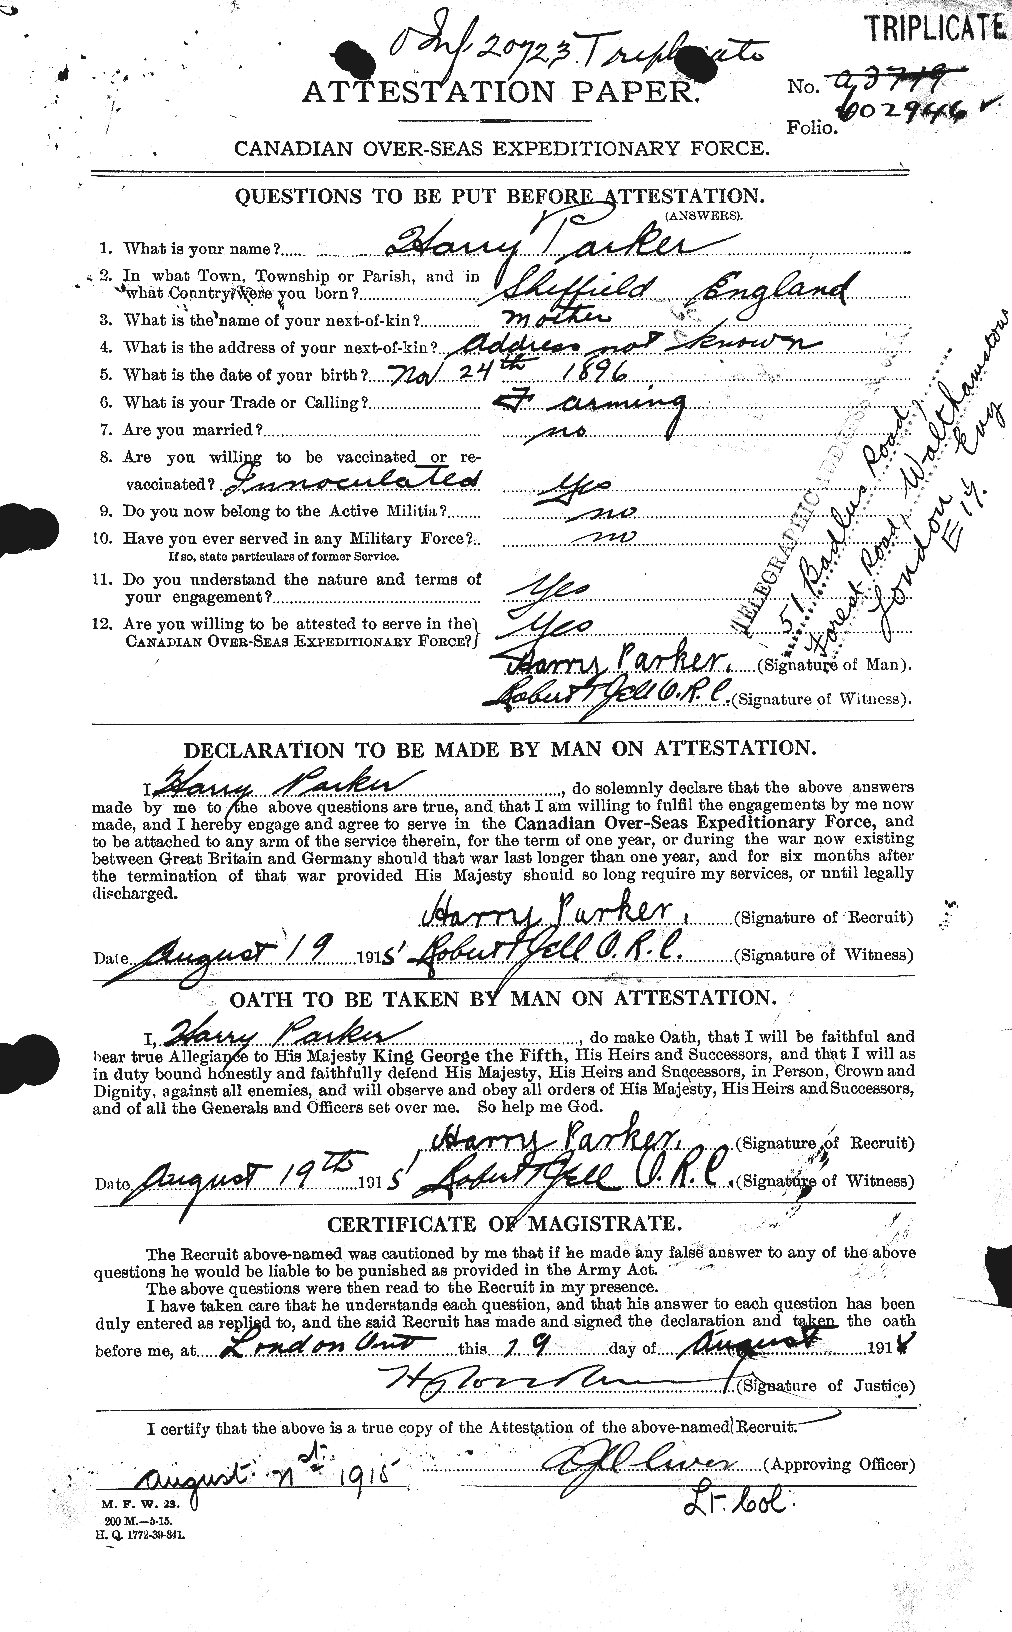 Personnel Records of the First World War - CEF 565484a